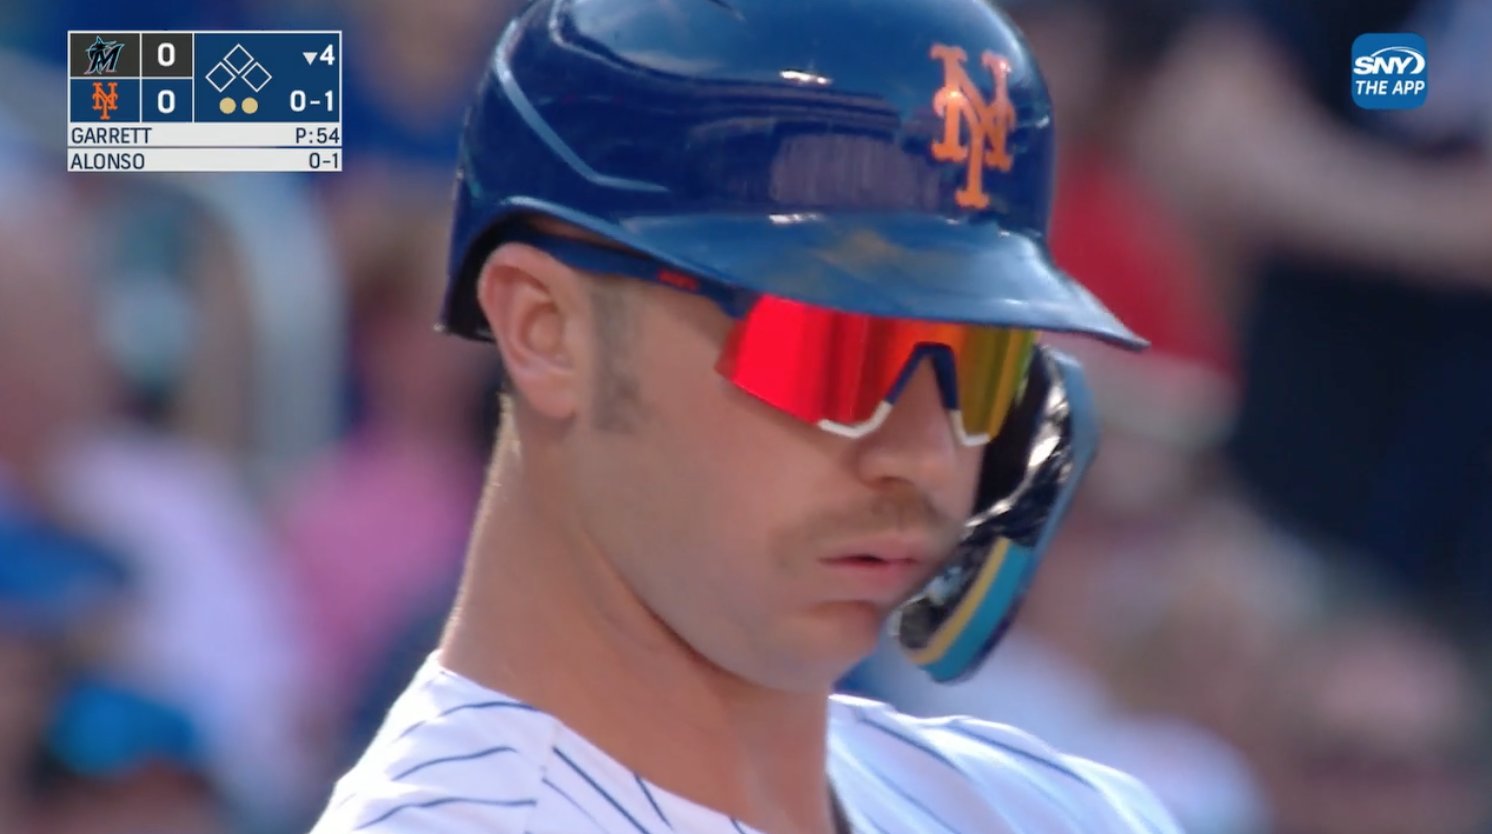 Deesha on X: Pete Alonso, sporting a mustache on Keith Hernandez's jersey  retirement day, has left the yard. His 23rd home run of the year gives the  Mets a 1-0 lead over